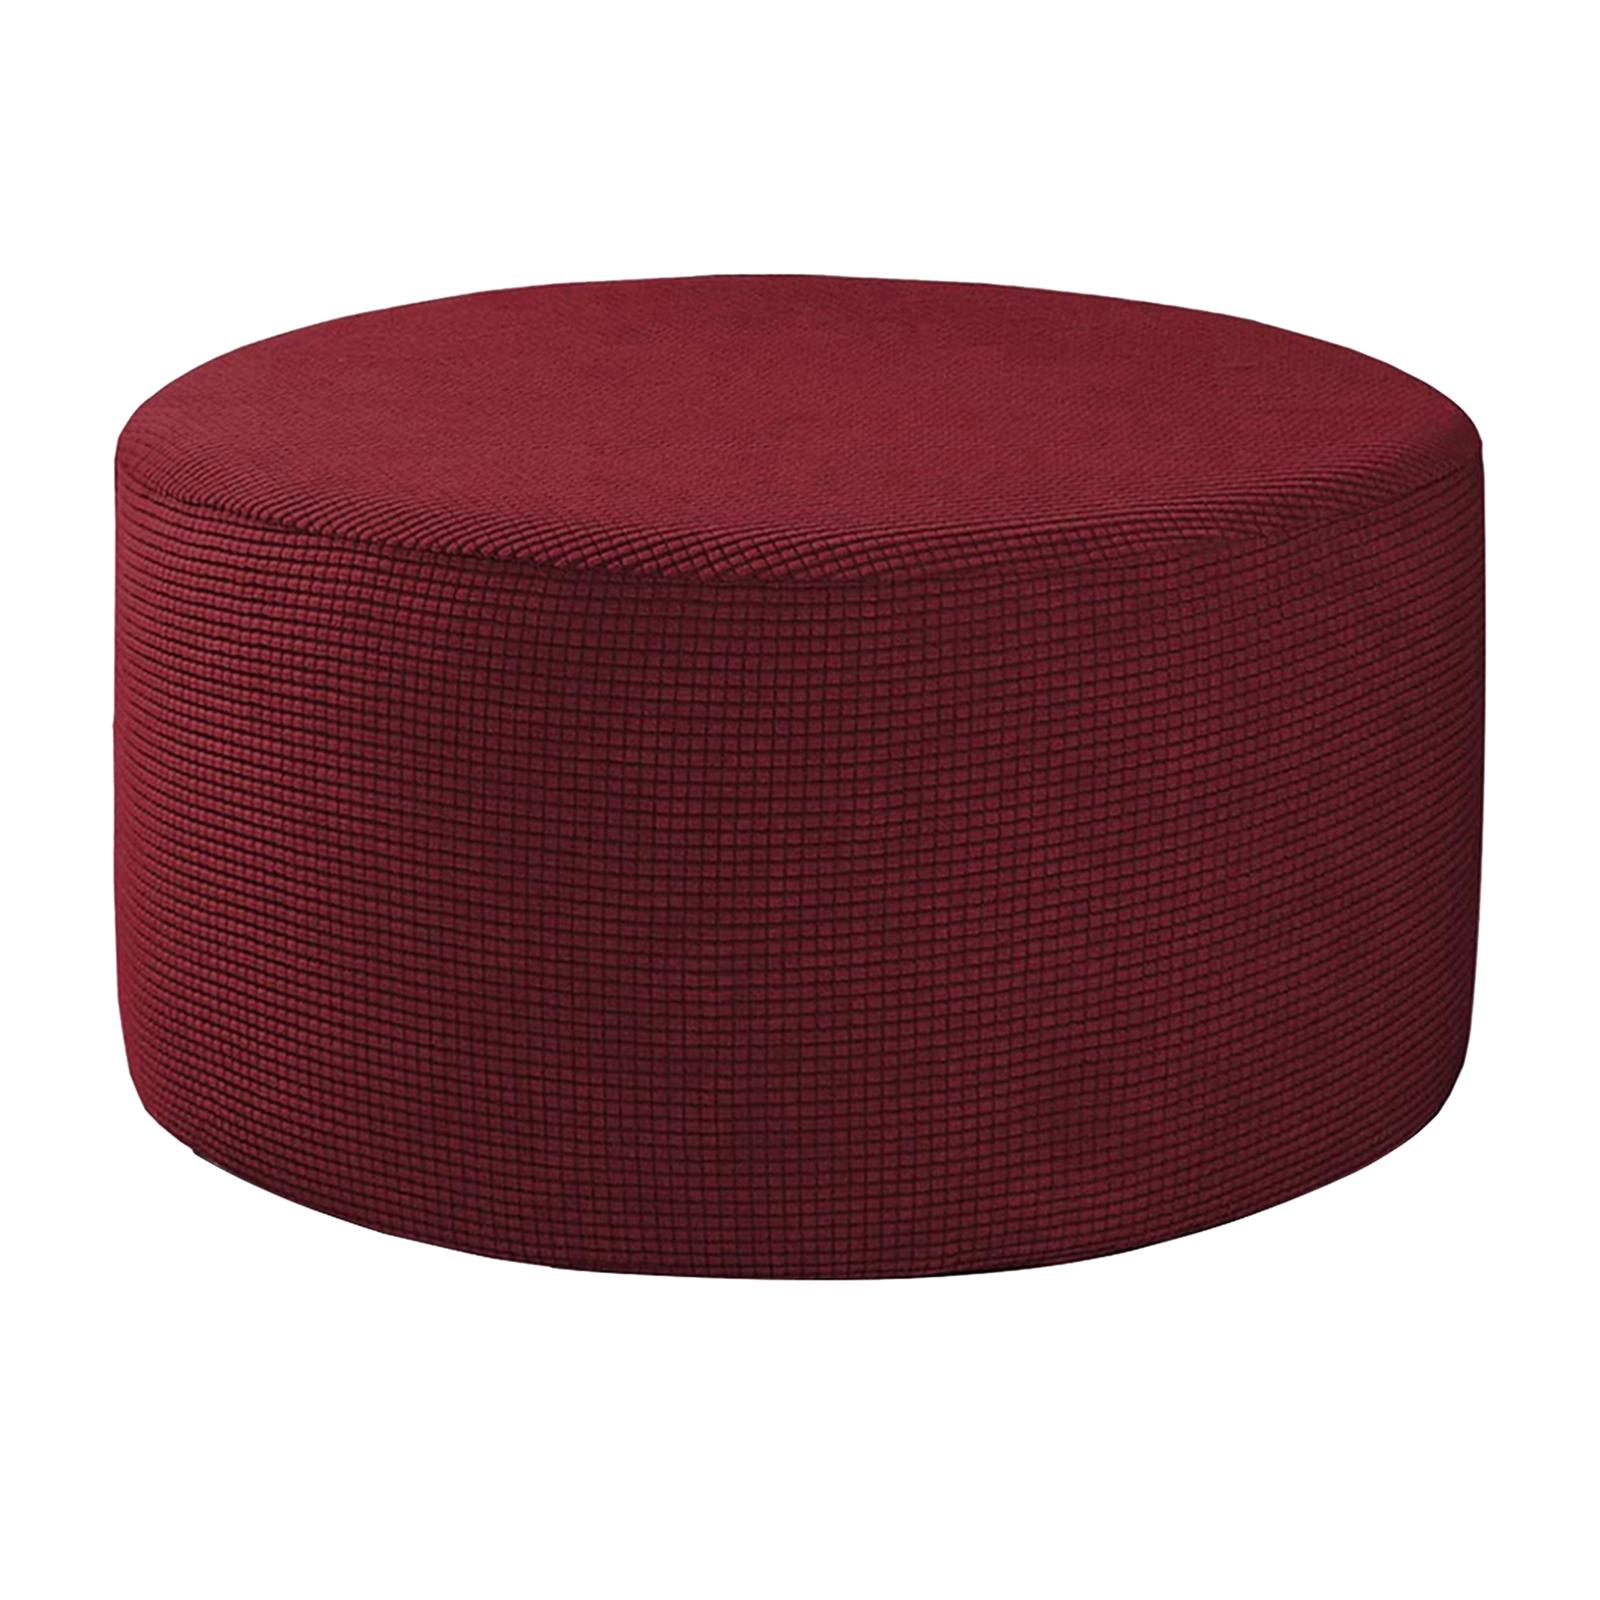 Ottoman Slipcovers Round Ottoman Footstool Cover Removable Red - image 1 of 6